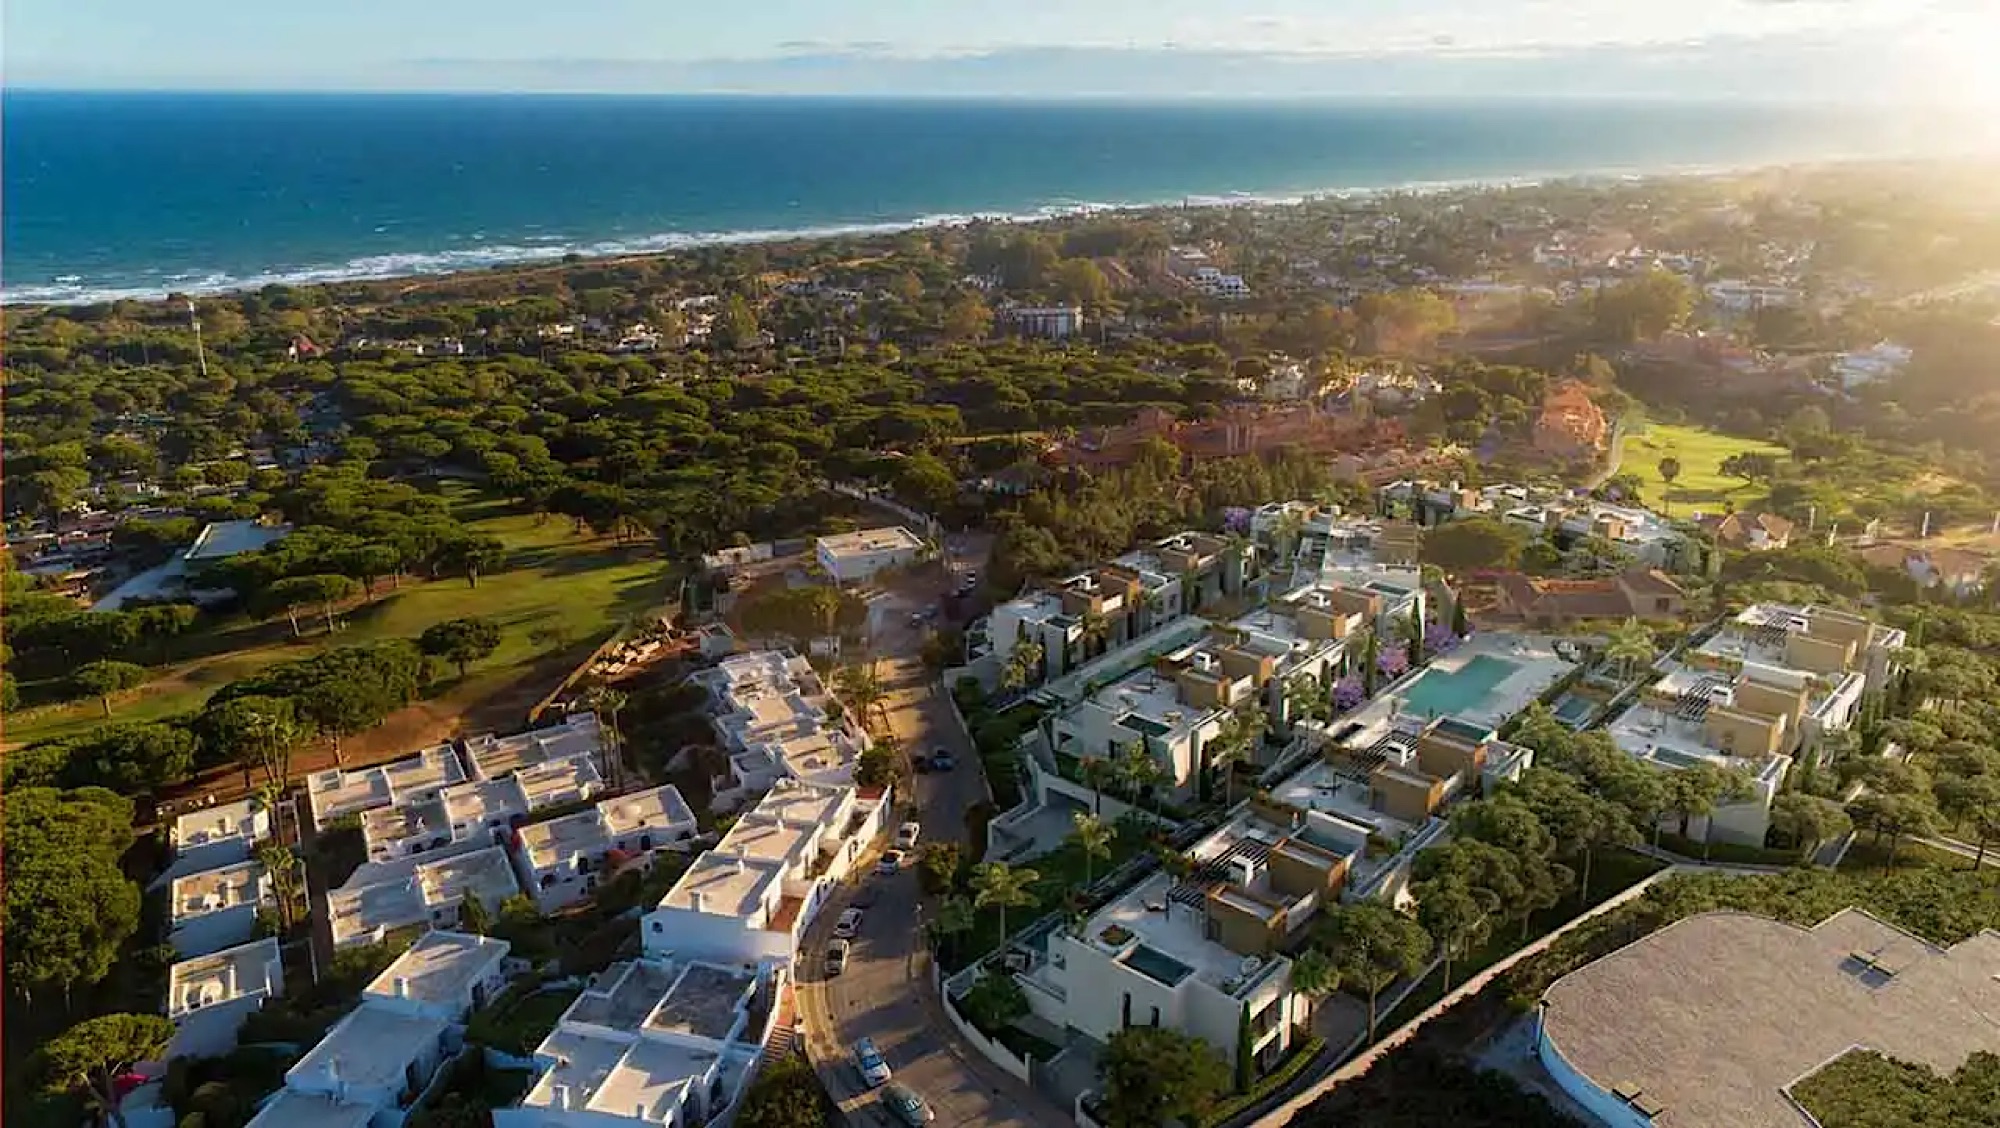 Luxury 2, 3 & 4 Bedroom Apartments with Sea and Golf Views – next to the Cabopino Golf Course in Marbella